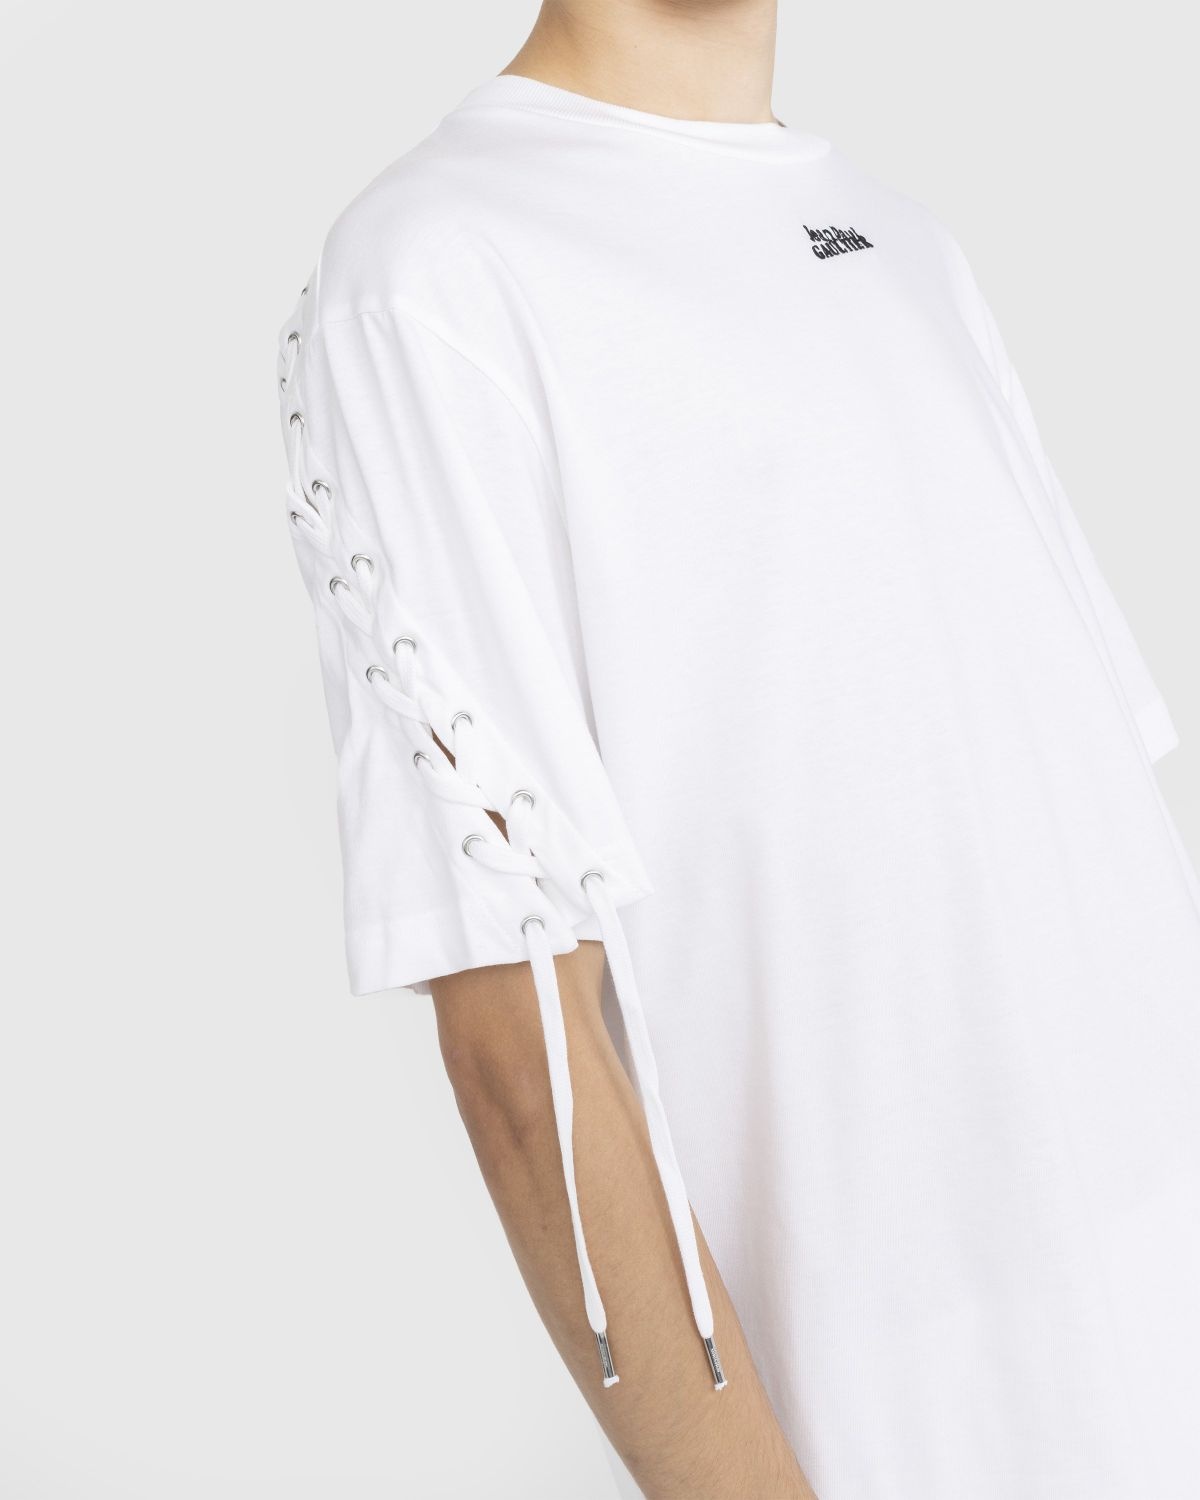 Jean Paul Gaultier – Oversize Laced Tee-Shirt White - 4